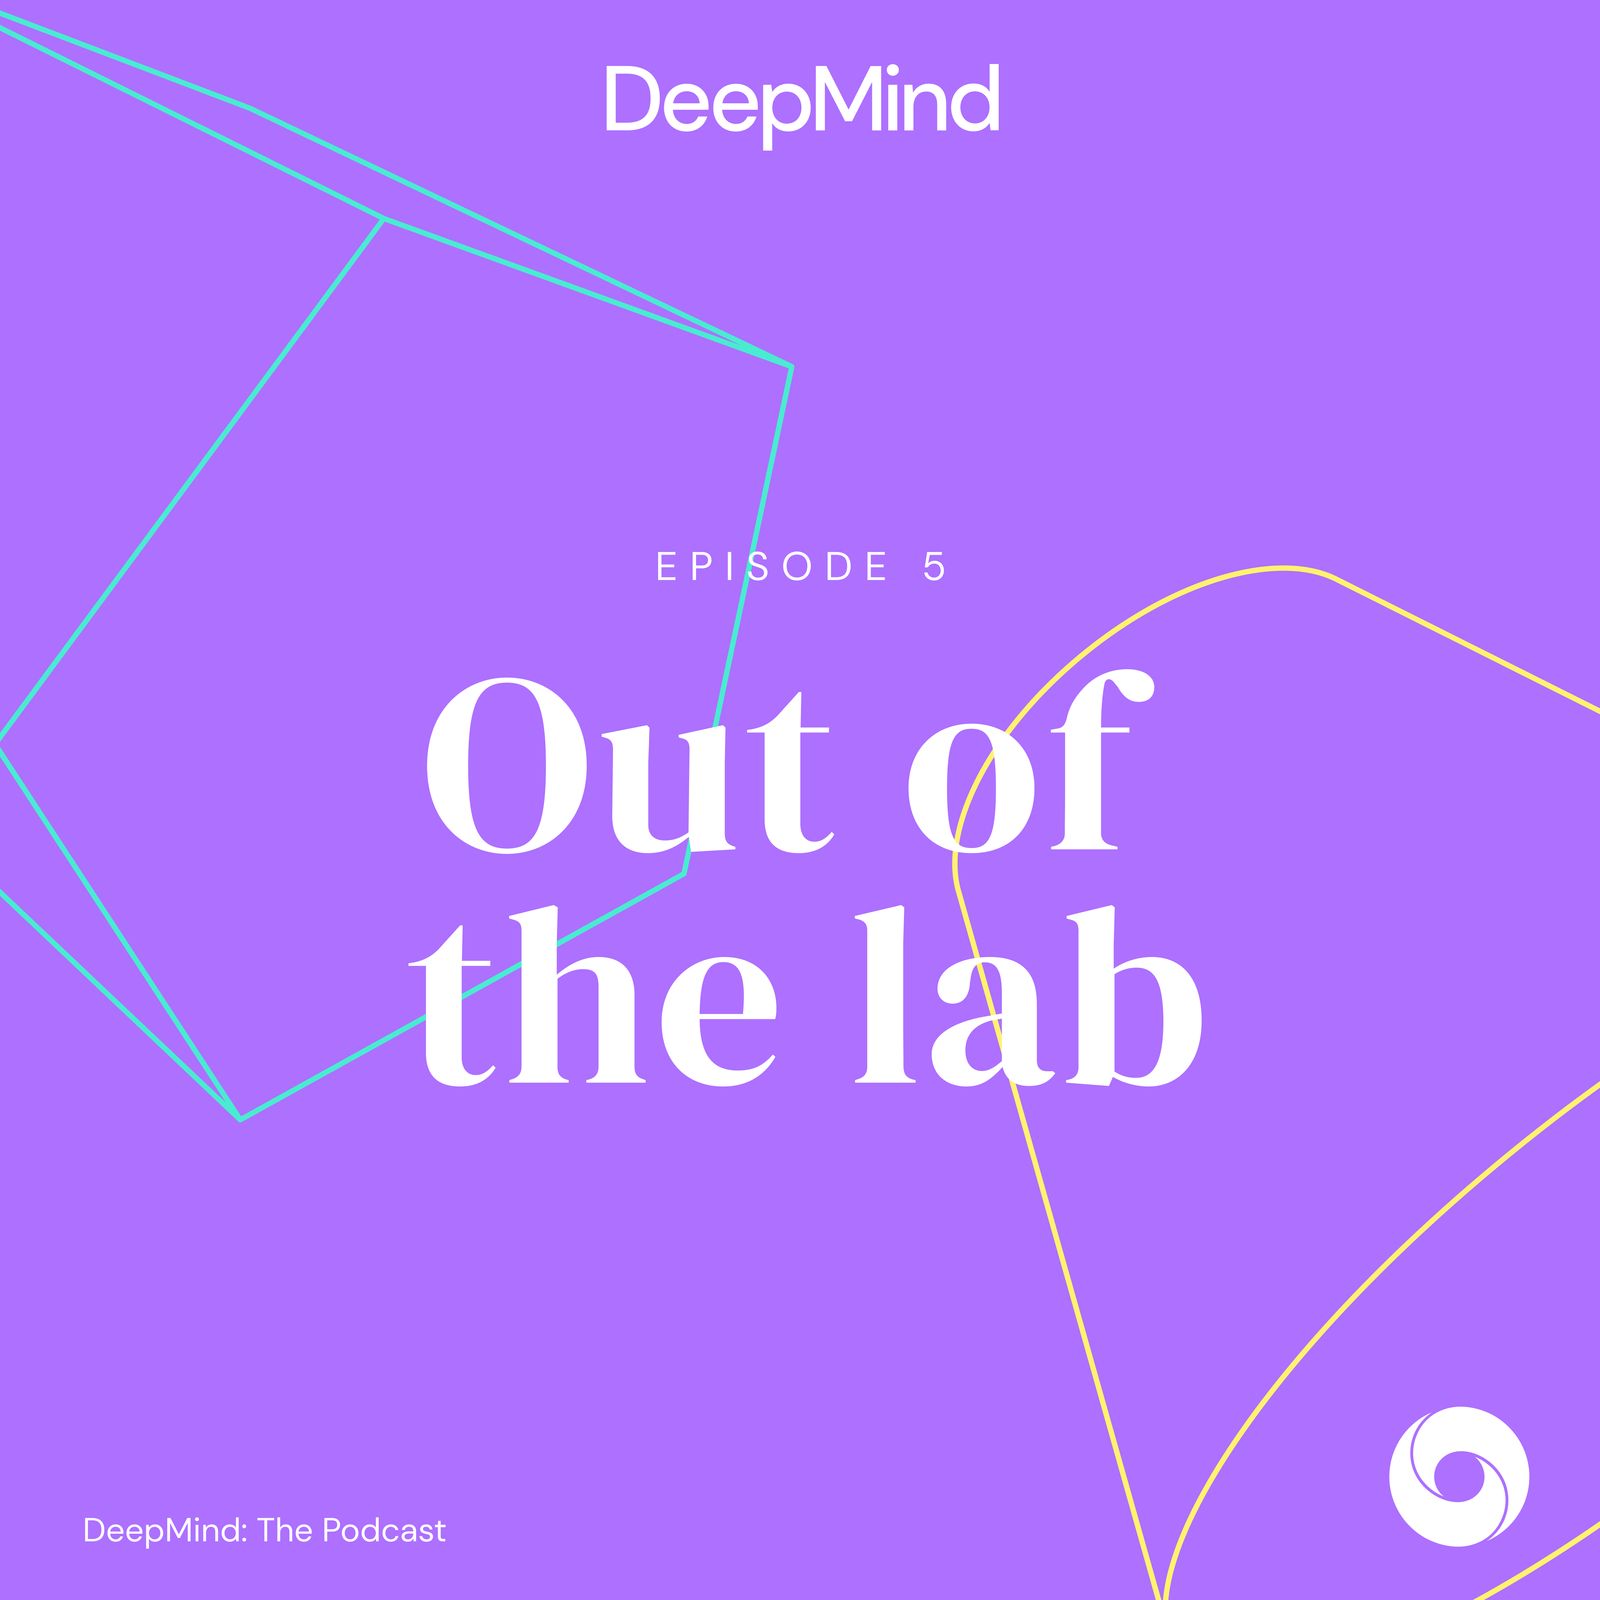 S1 Ep5: Out of the lab